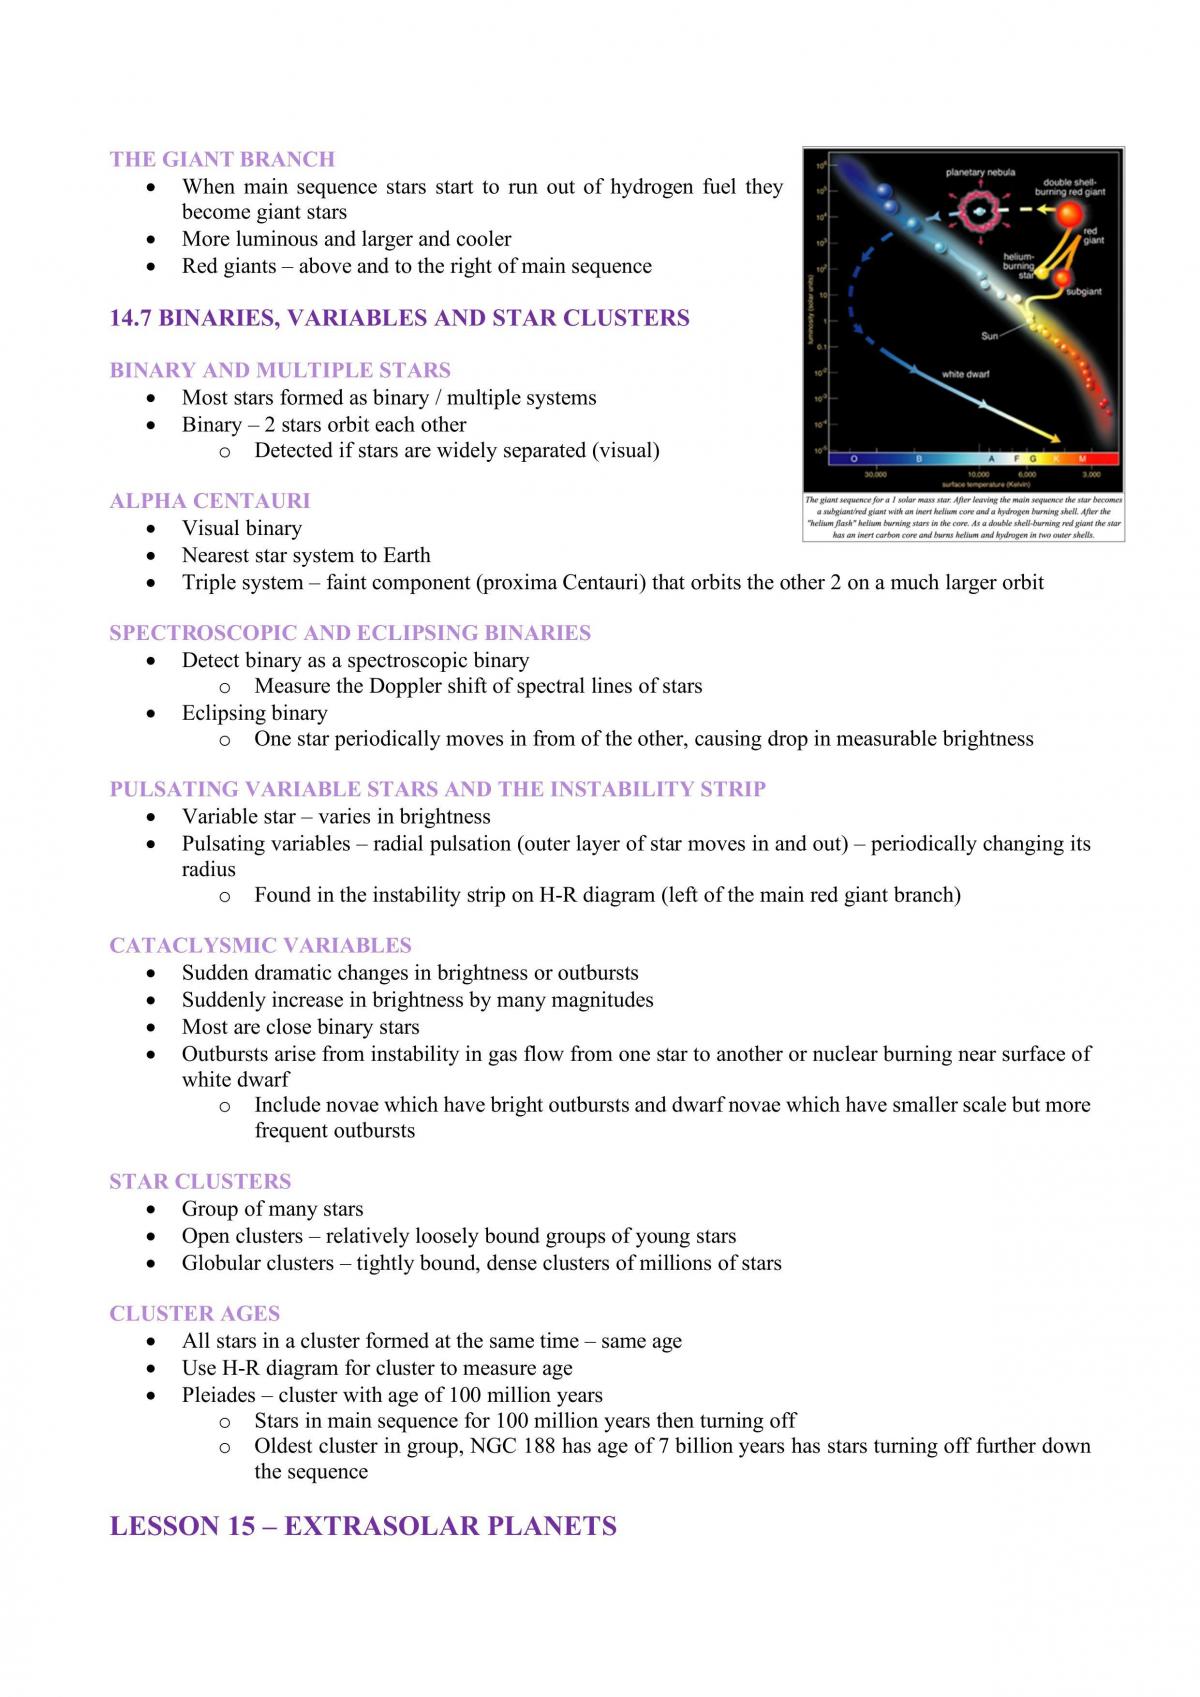 PHYS1160 Complete Study Notes PHYS1160 - Introduction to Astronomy